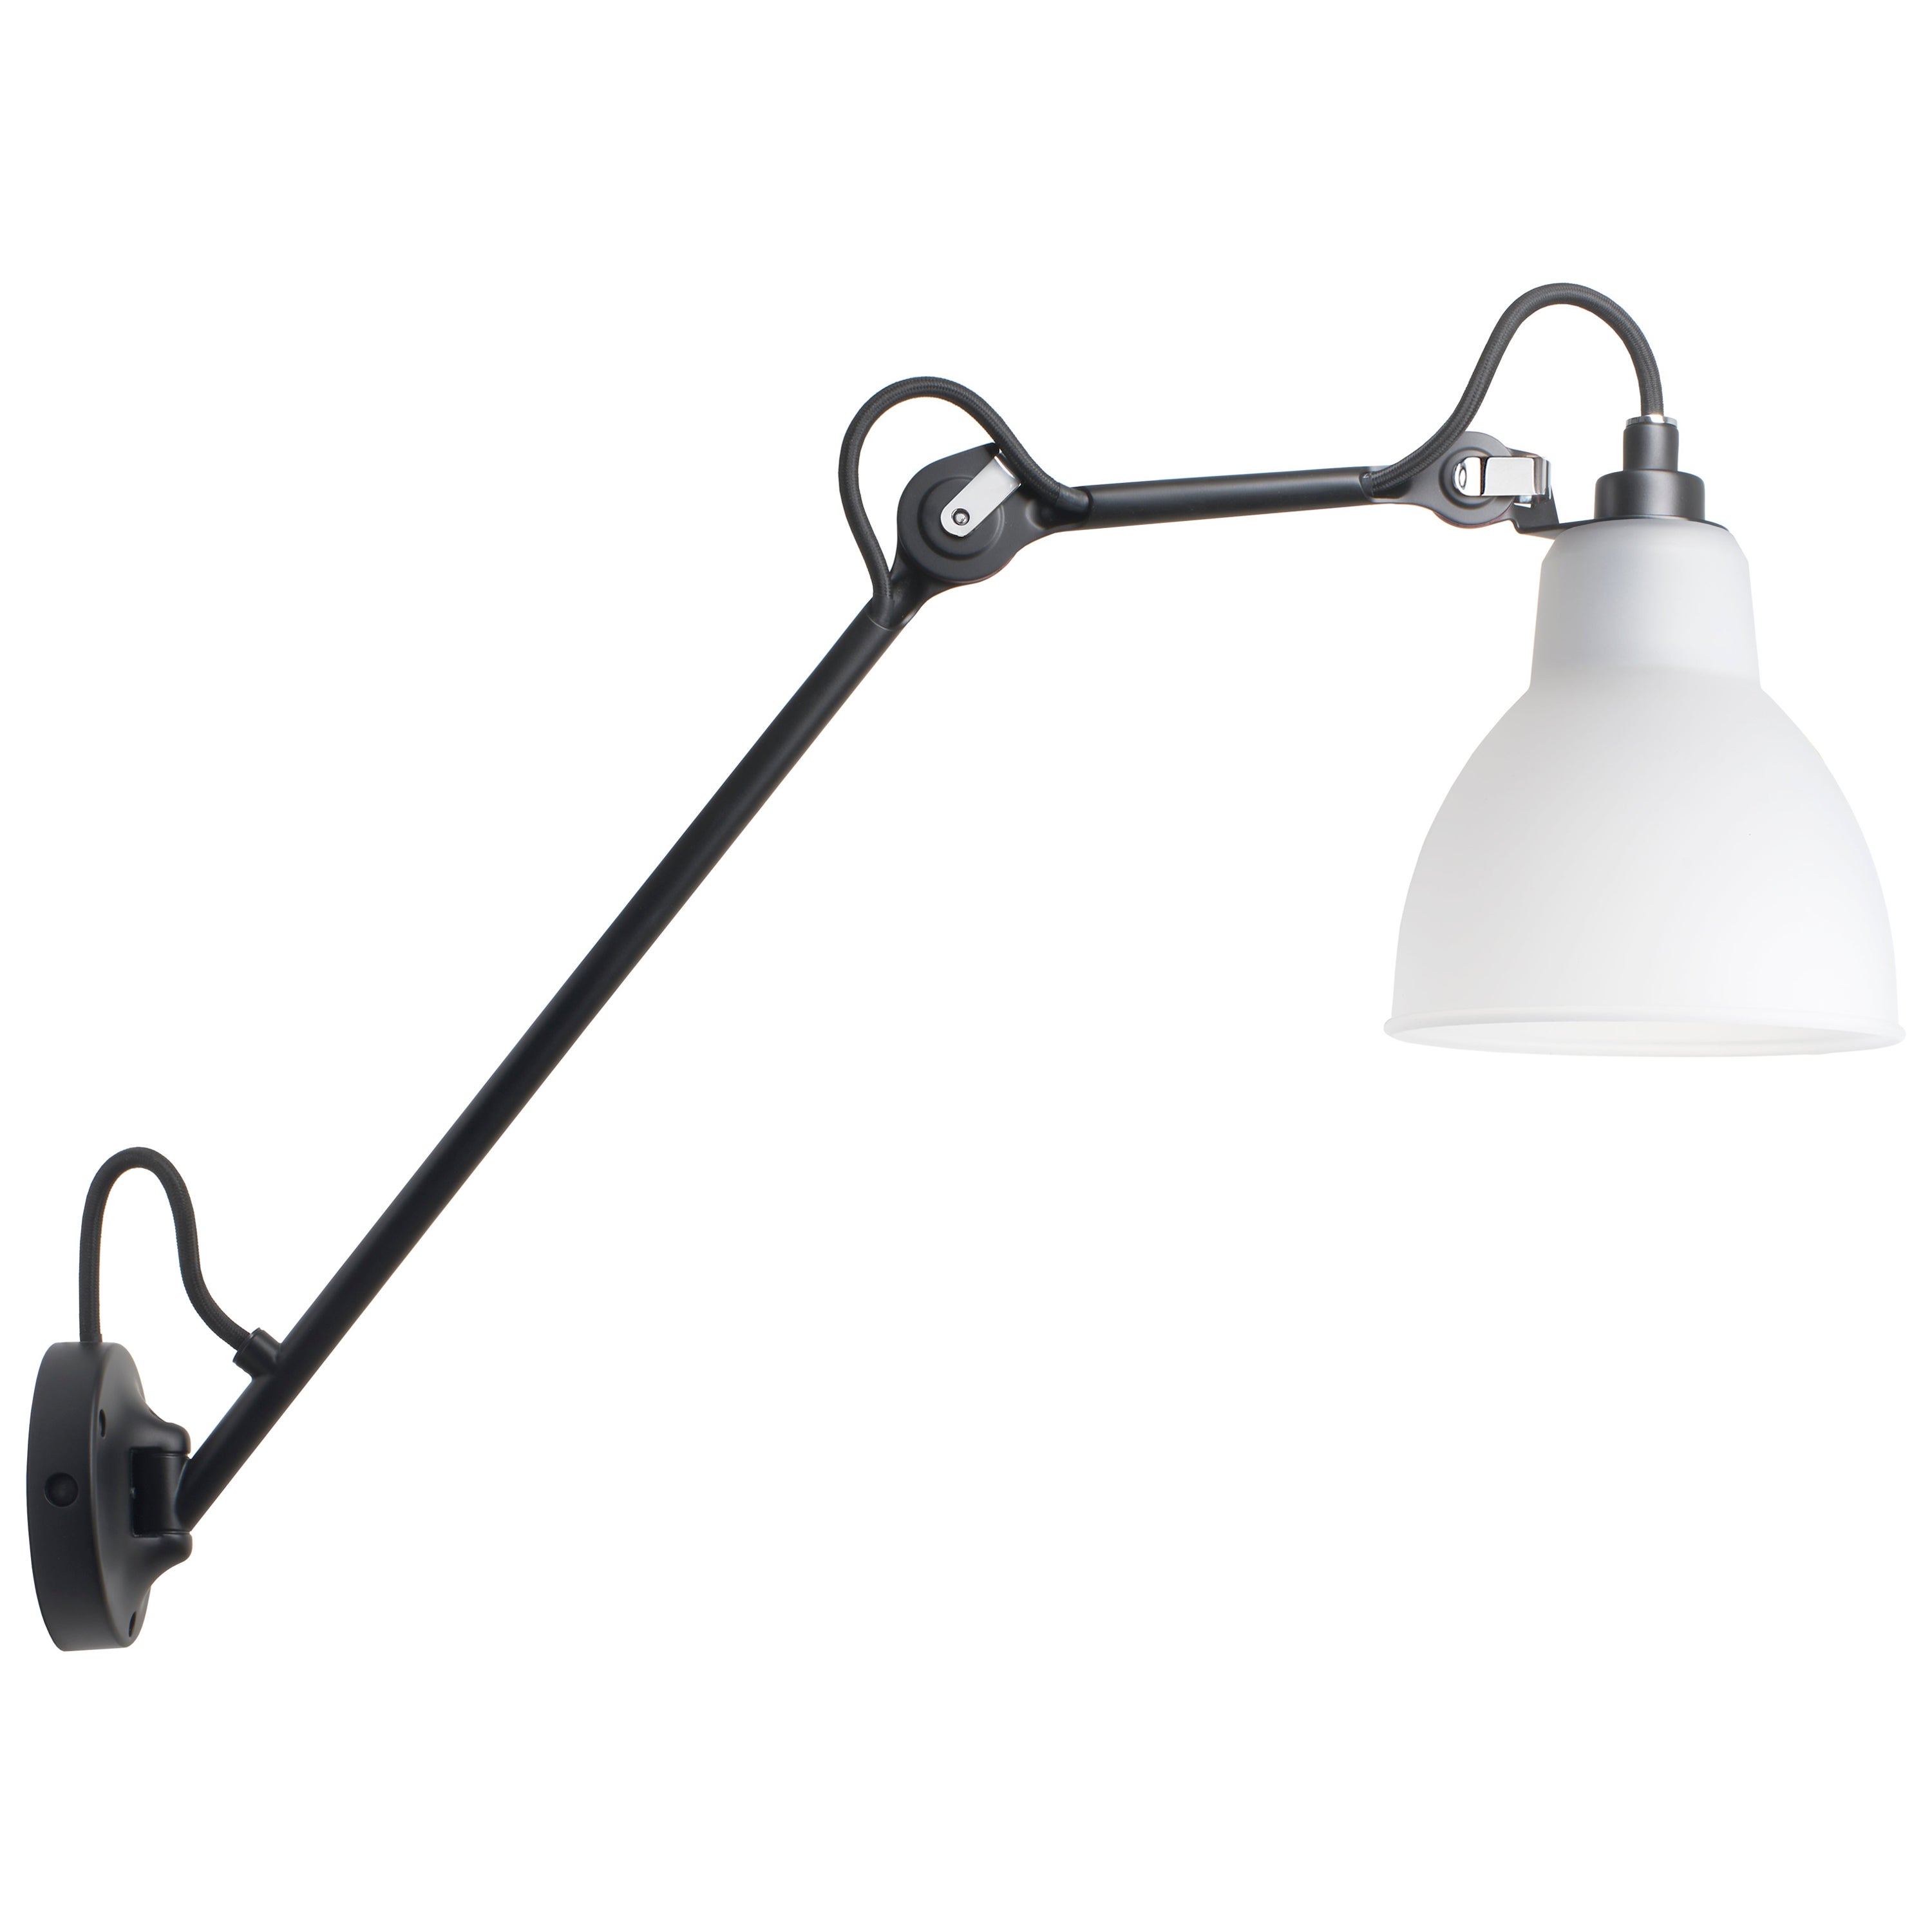 DCW Editions La Lampe Gras N°122 Wall Lamp in Black Arm and Polycarbonate Shade